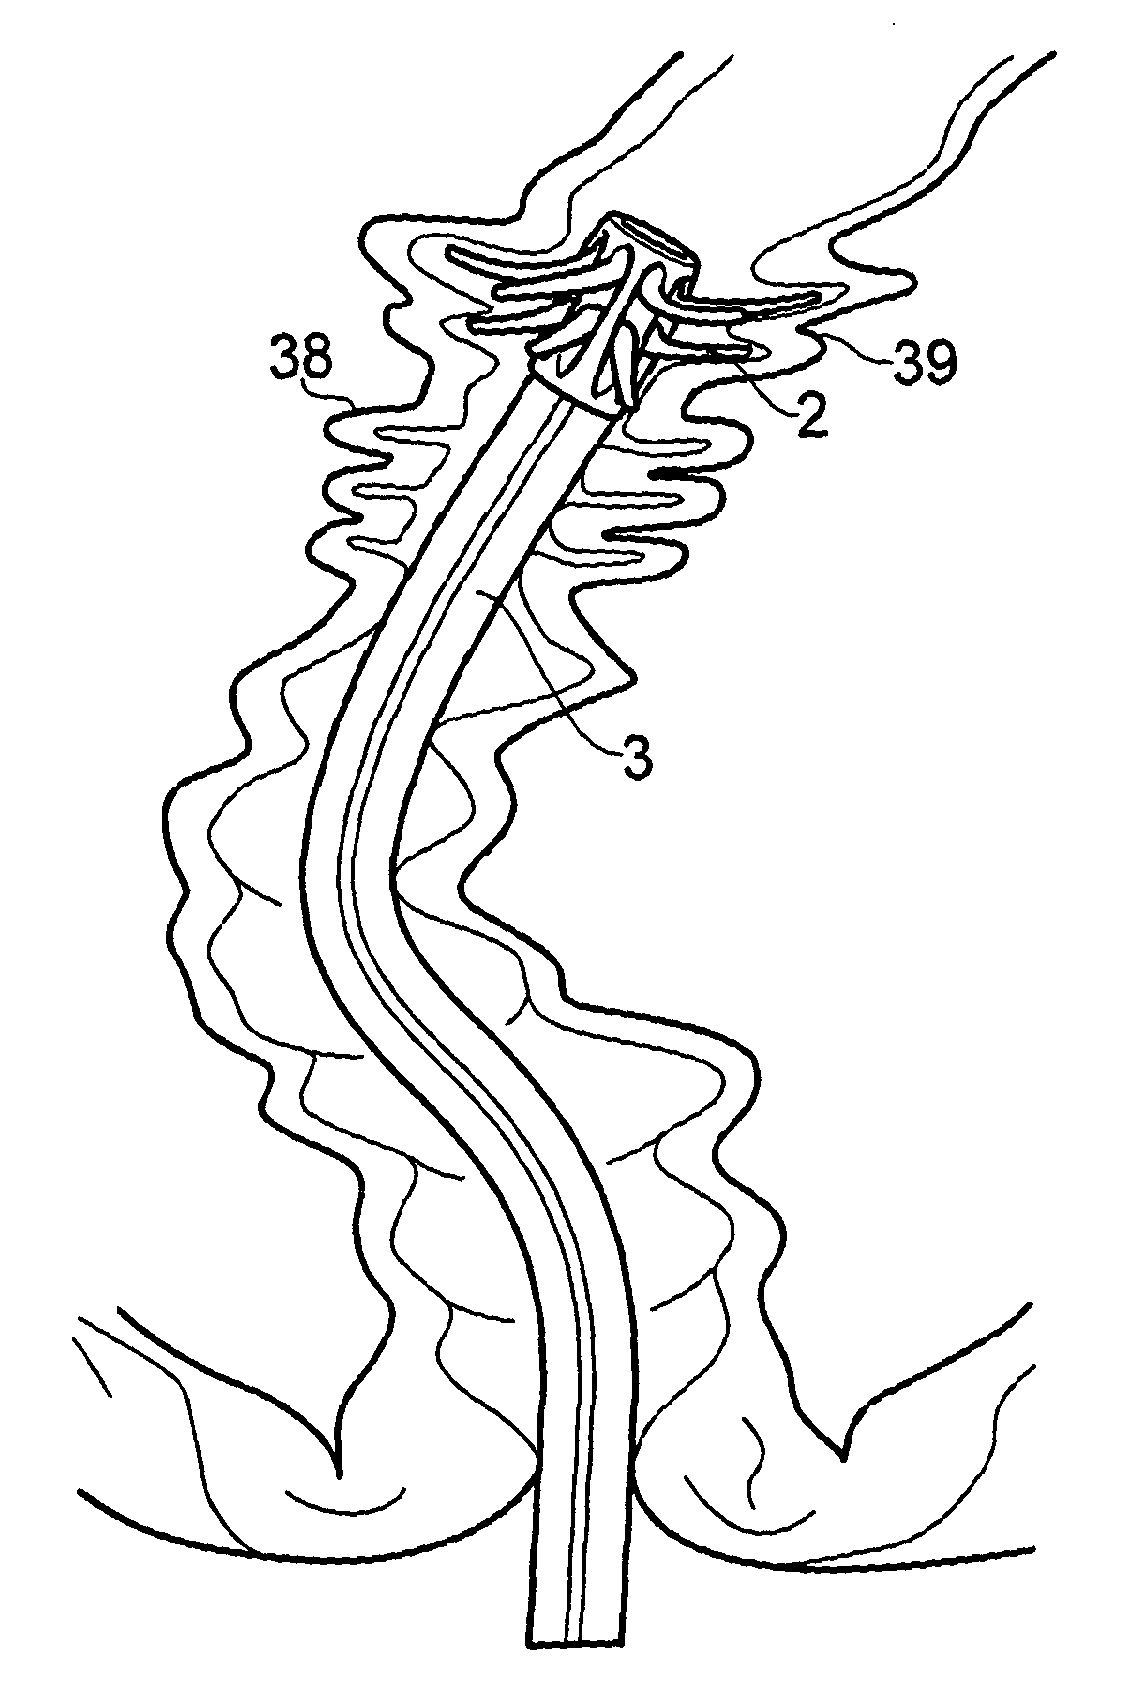 Covering for a medical scoping device